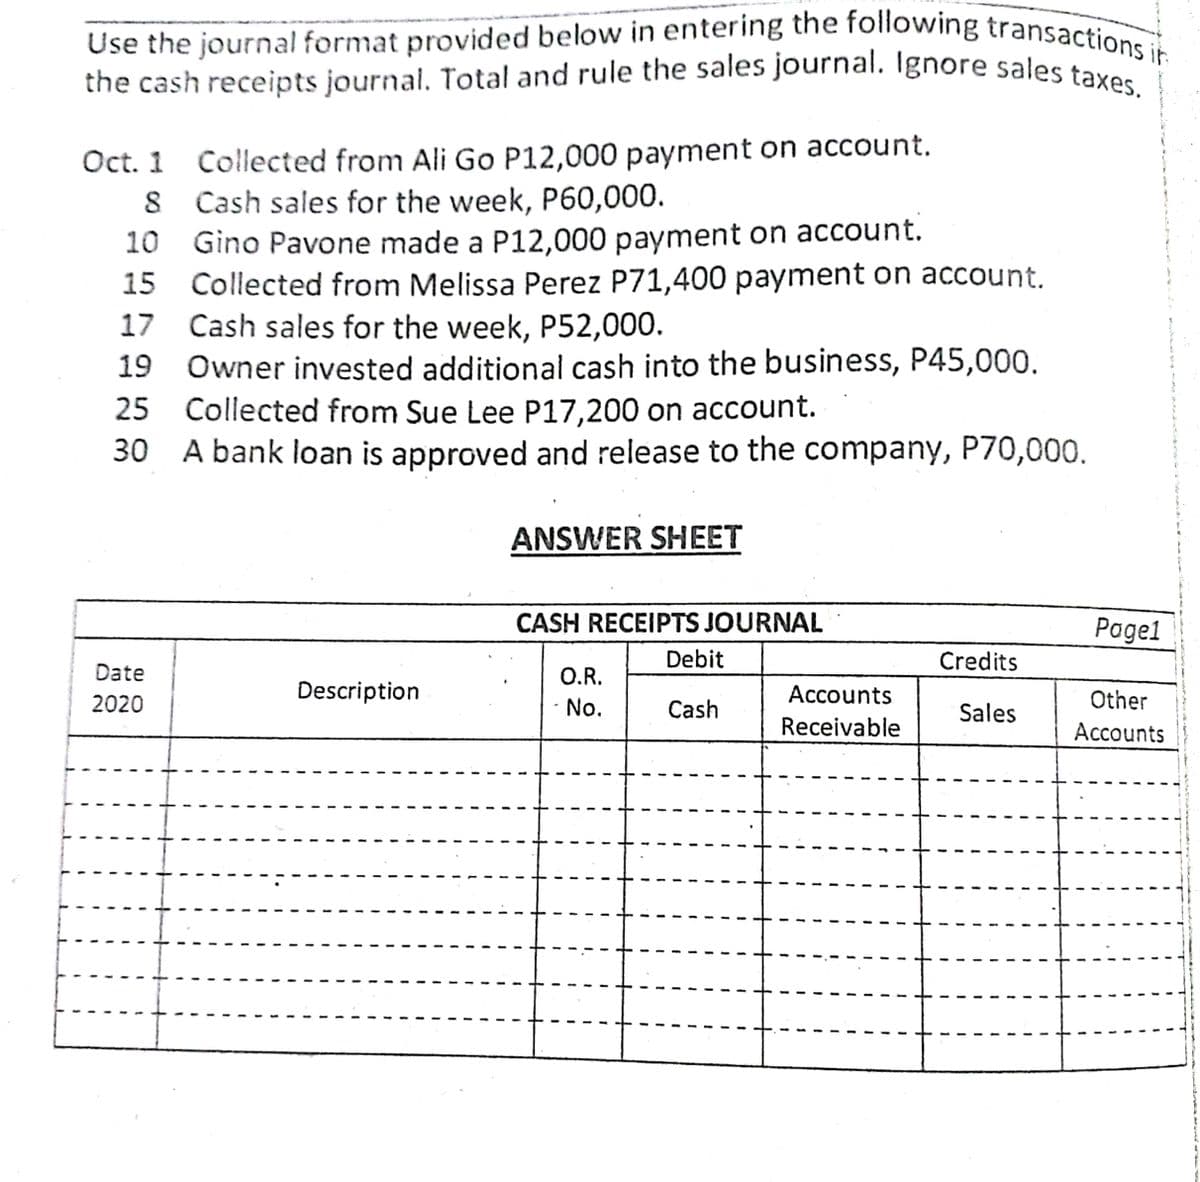 the cash receipts journal. Total and rule the sales journal. Ignore sales taxes.
Use the journal format provided below in entering the following transactions it
Oct. 1 Collected from Ali Go P12,000 payment on account.
8 Cash sales for the week, P60,000.
10 Gino Pavone made a P12,000 payment on account.
15 Collected from Melissa Perez P71,400 payment on account.
17 Cash sales for the week, P52,000.
19 Owner invested additional cash into the business, P45,000.
25 Collected from Sue Lee P17,200 on account.
30 A bank loan is approved and release to the company, P70,000.
ANSWER SHEET
CASH RECEIPTS JOURNAL
Pagel
Debit
Credits
Date
O.R.
2020
Description
Accounts
Other
No.
Cash
Sales
Receivable
Accounts
1.
1.
